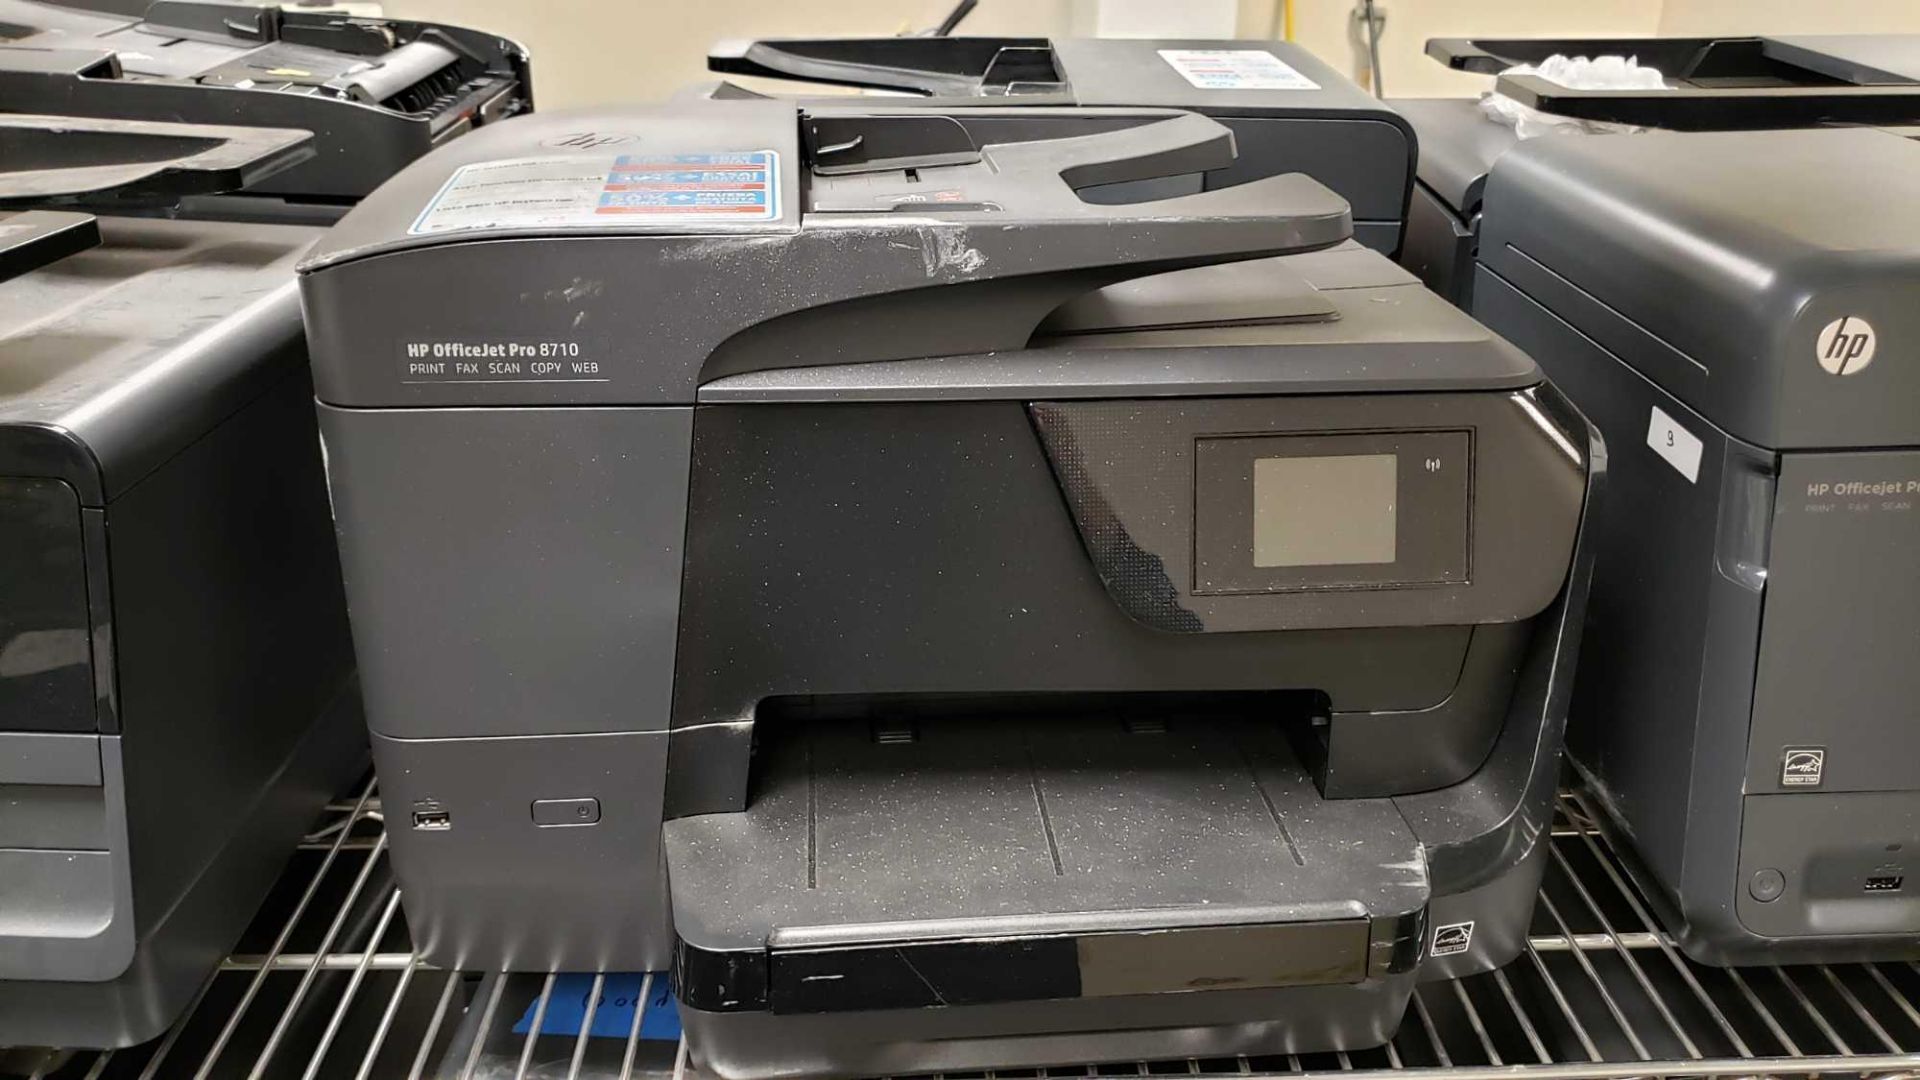 Lot of (3) HP Printers to include (2) HP Officejet Pro 8610 and (1) HP Officejet Pro 8710 - Image 3 of 4